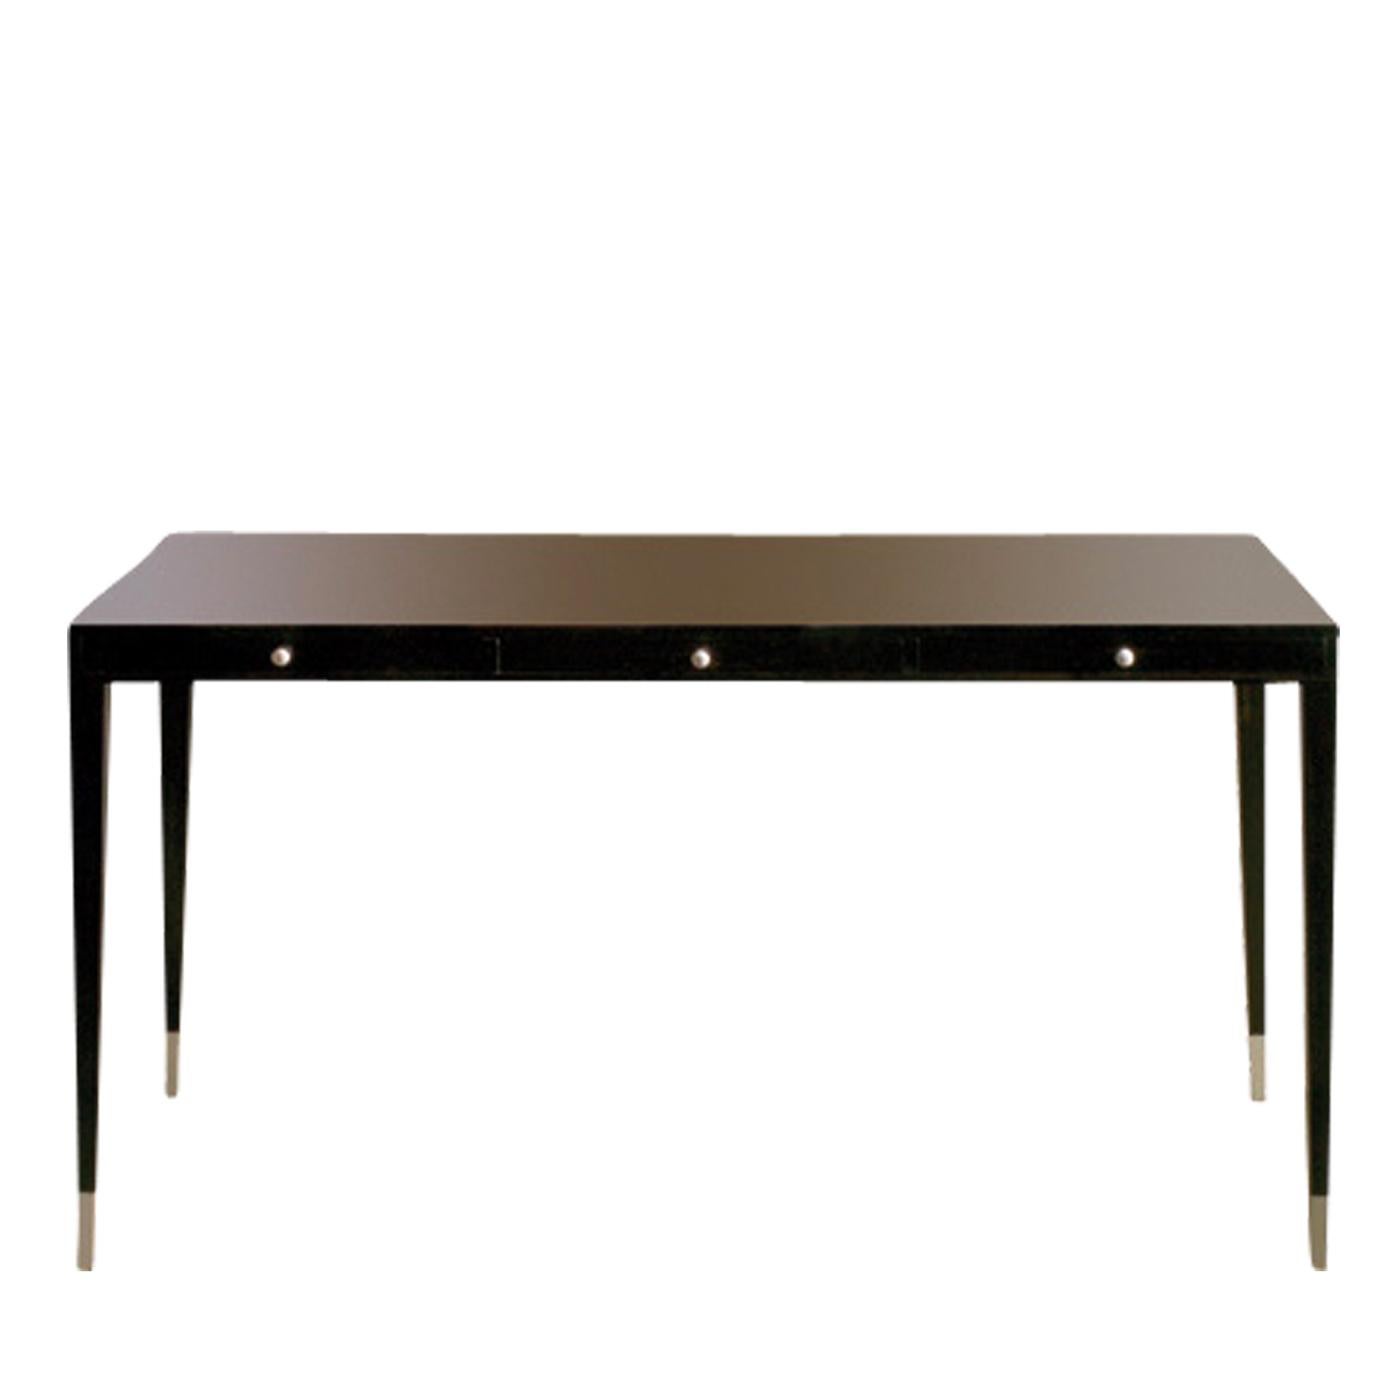 Elegant and timeless, this desk will be a sophisticated choice for any interior. Either in an office, private study, or behind a sofa in the living room, this piece will be functional and decorative, offering a superb display and work surface in